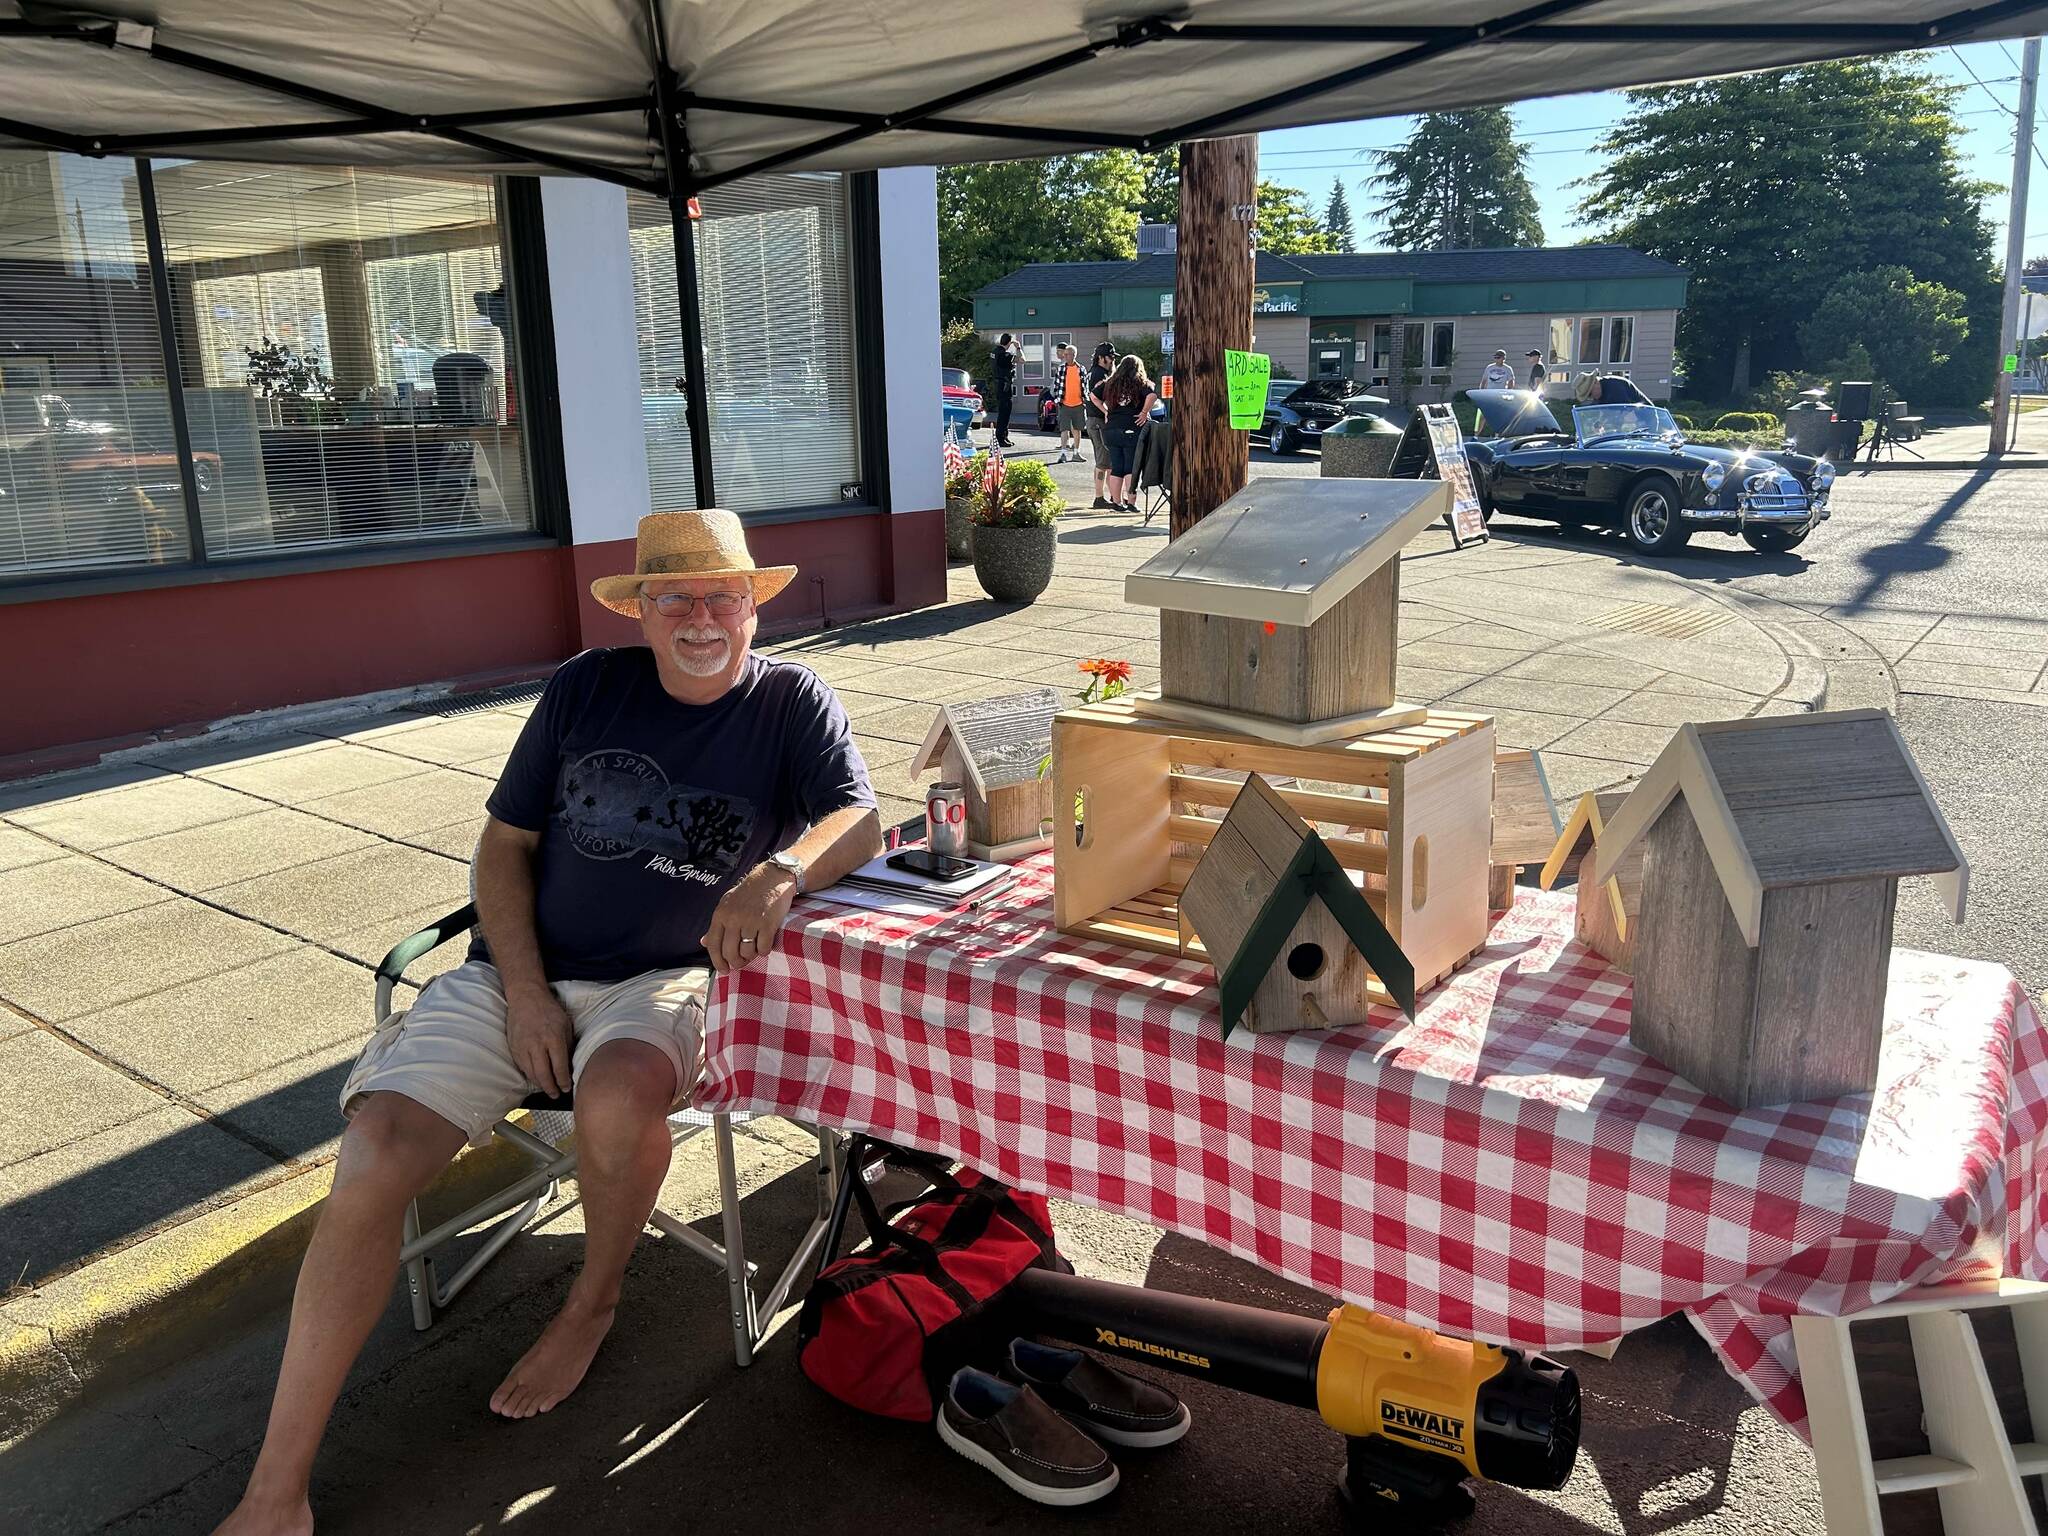 Tom Lane sells his homemade bird houses at The HIstoric Montesano car show on July 15. (Lillian Saeger / The Daily World)